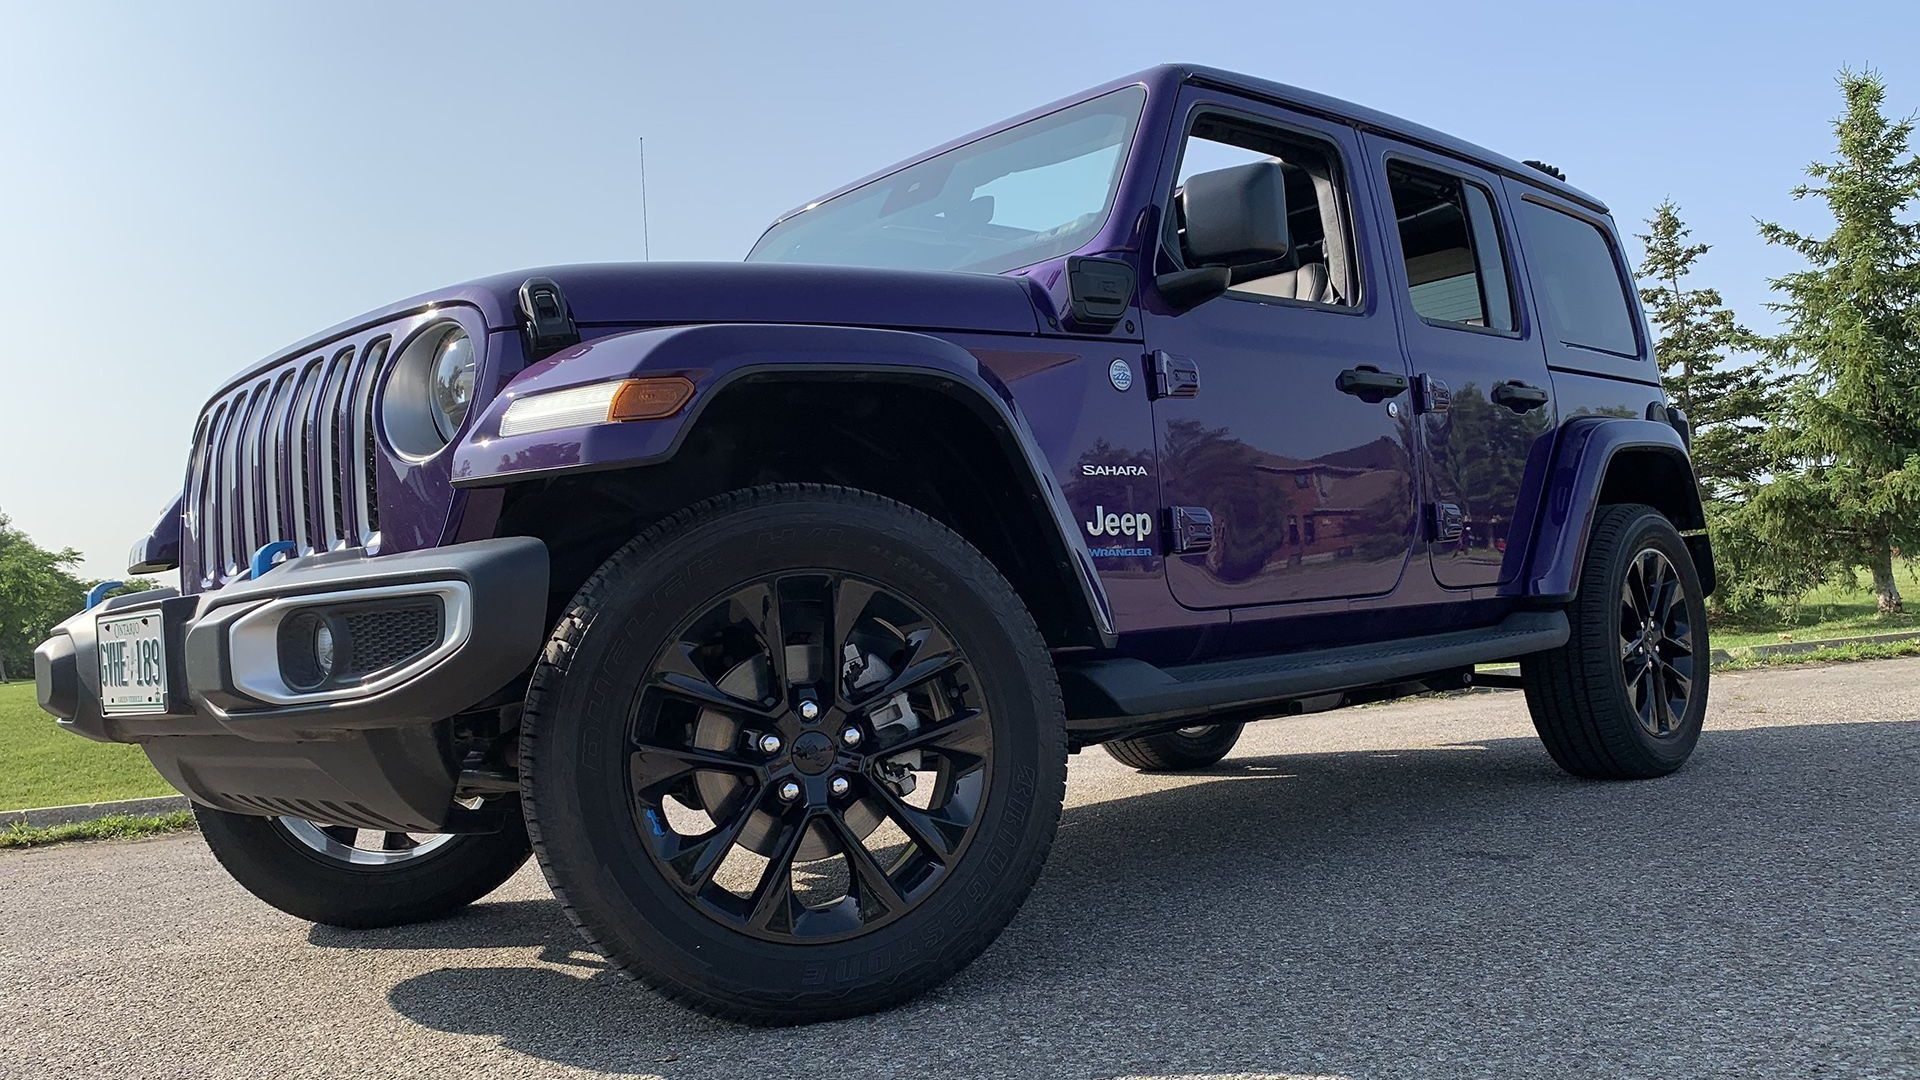 The updated Jeep Wrangler has brilliant new colour options